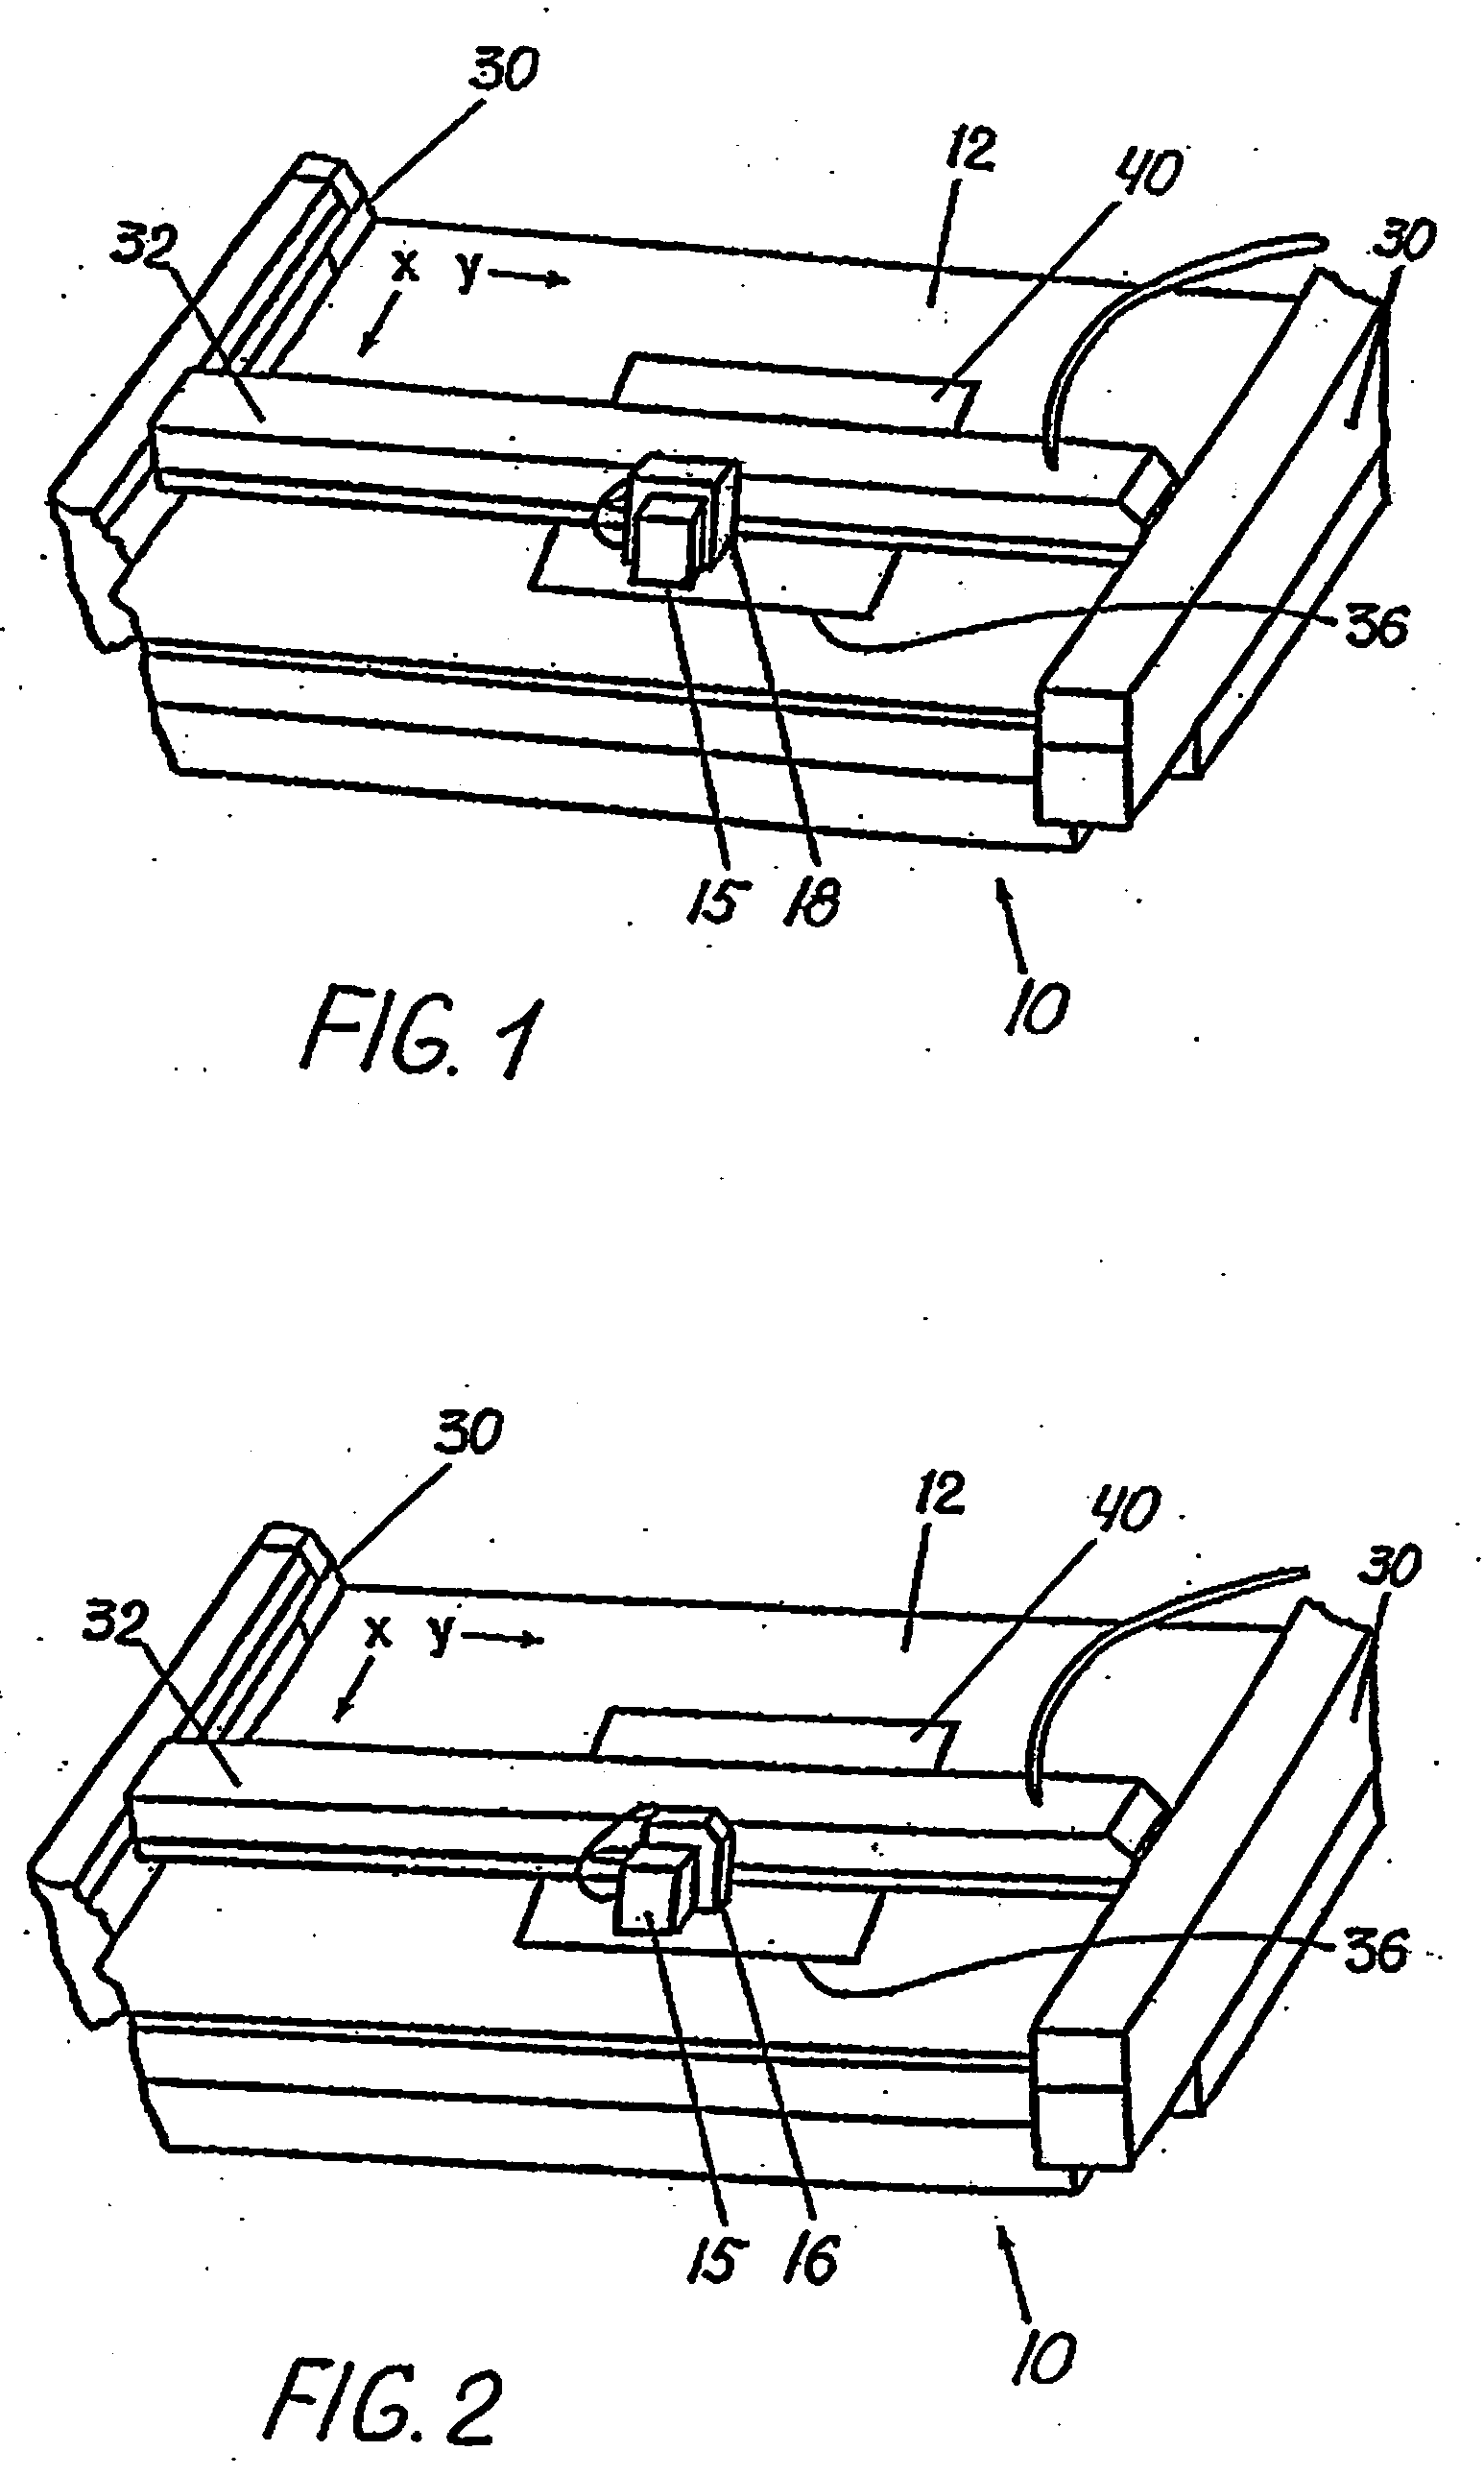 Method and Apparatus for Fray-Free Cutting with Laser Anti-Fray Inducement